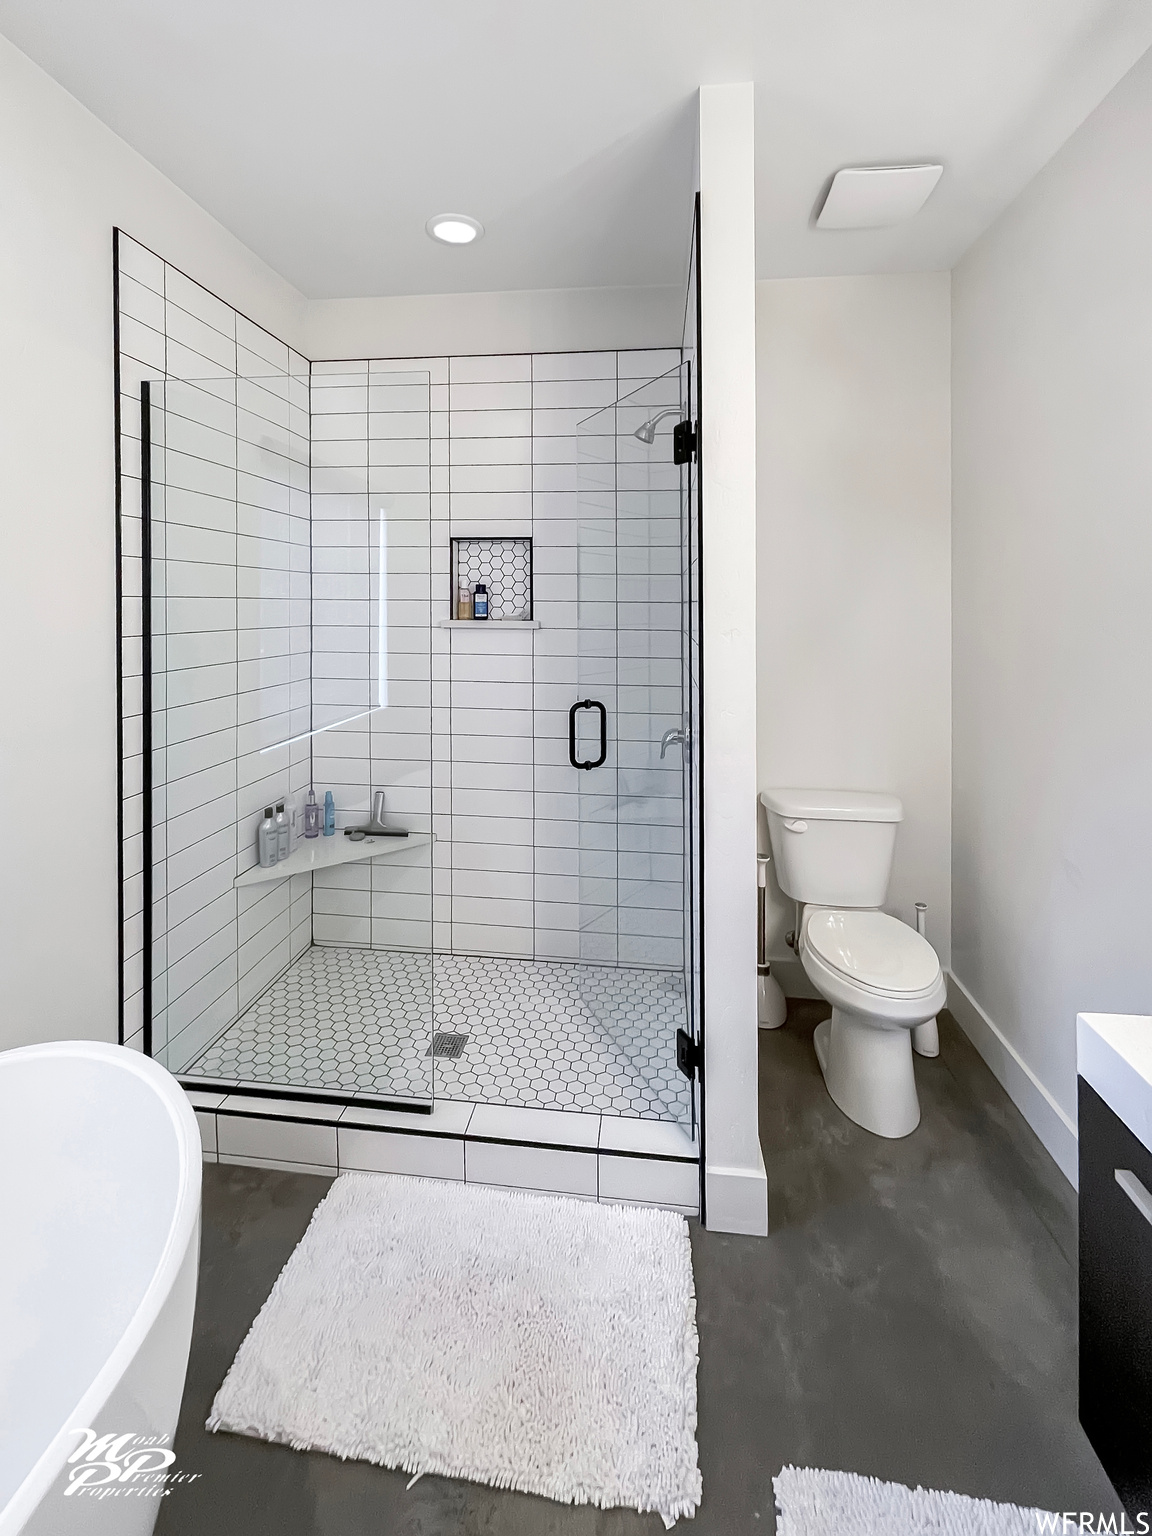 Full bathroom with concrete floors, vanity, and separate shower and tub enclosures